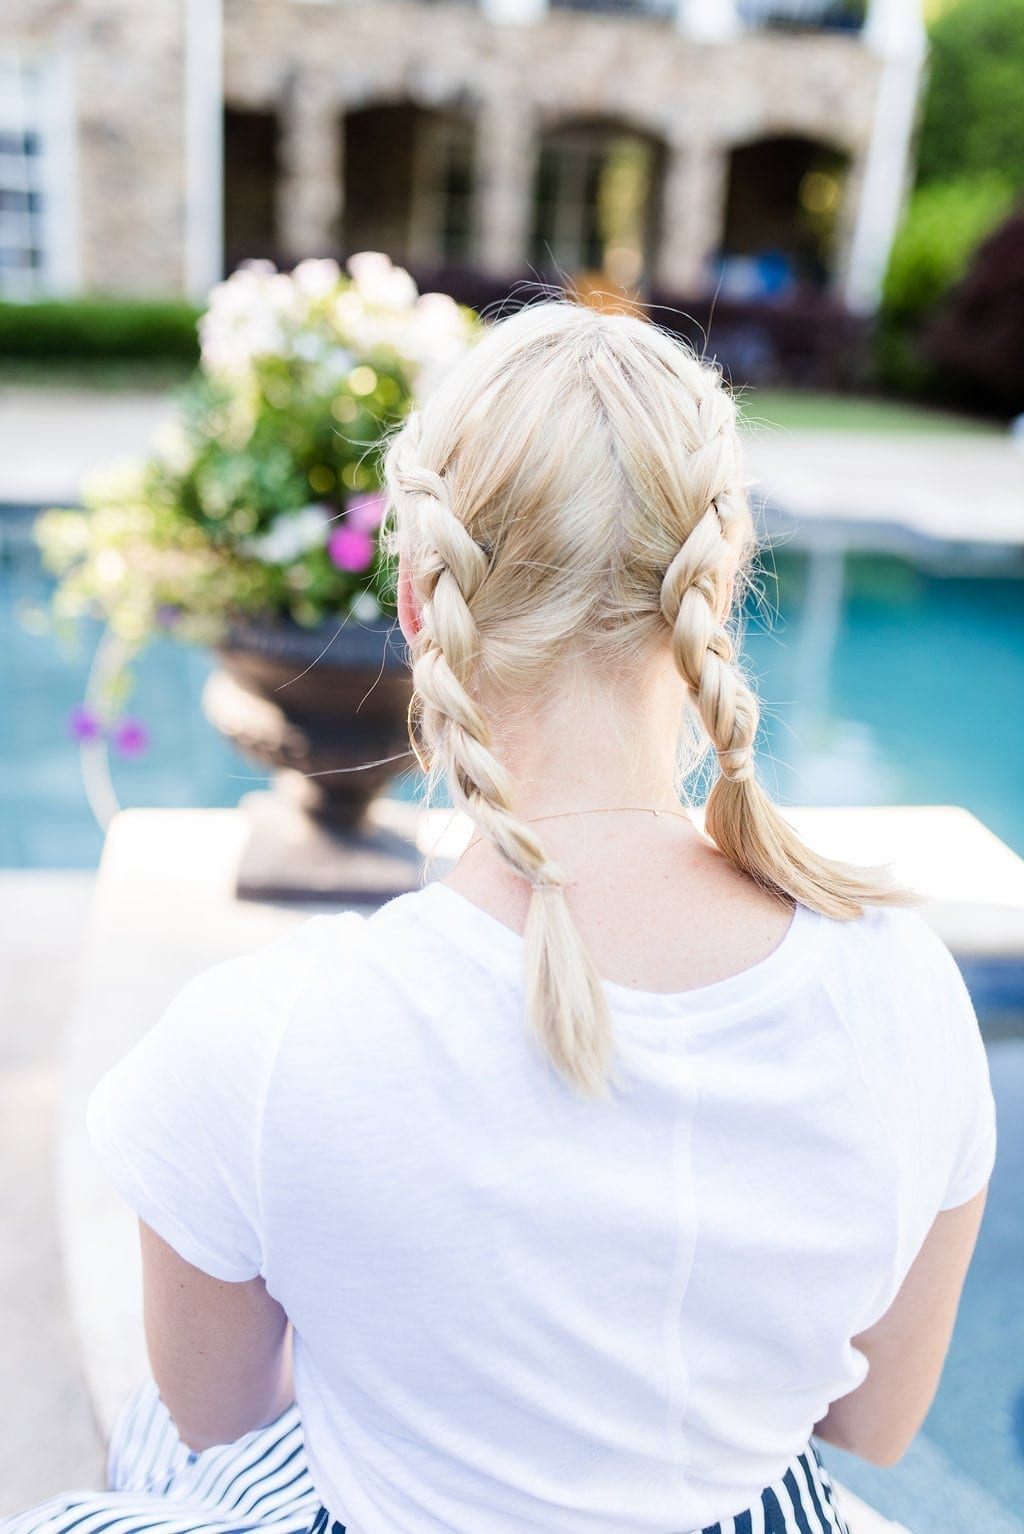 Side braids. How to braid hair for girls.